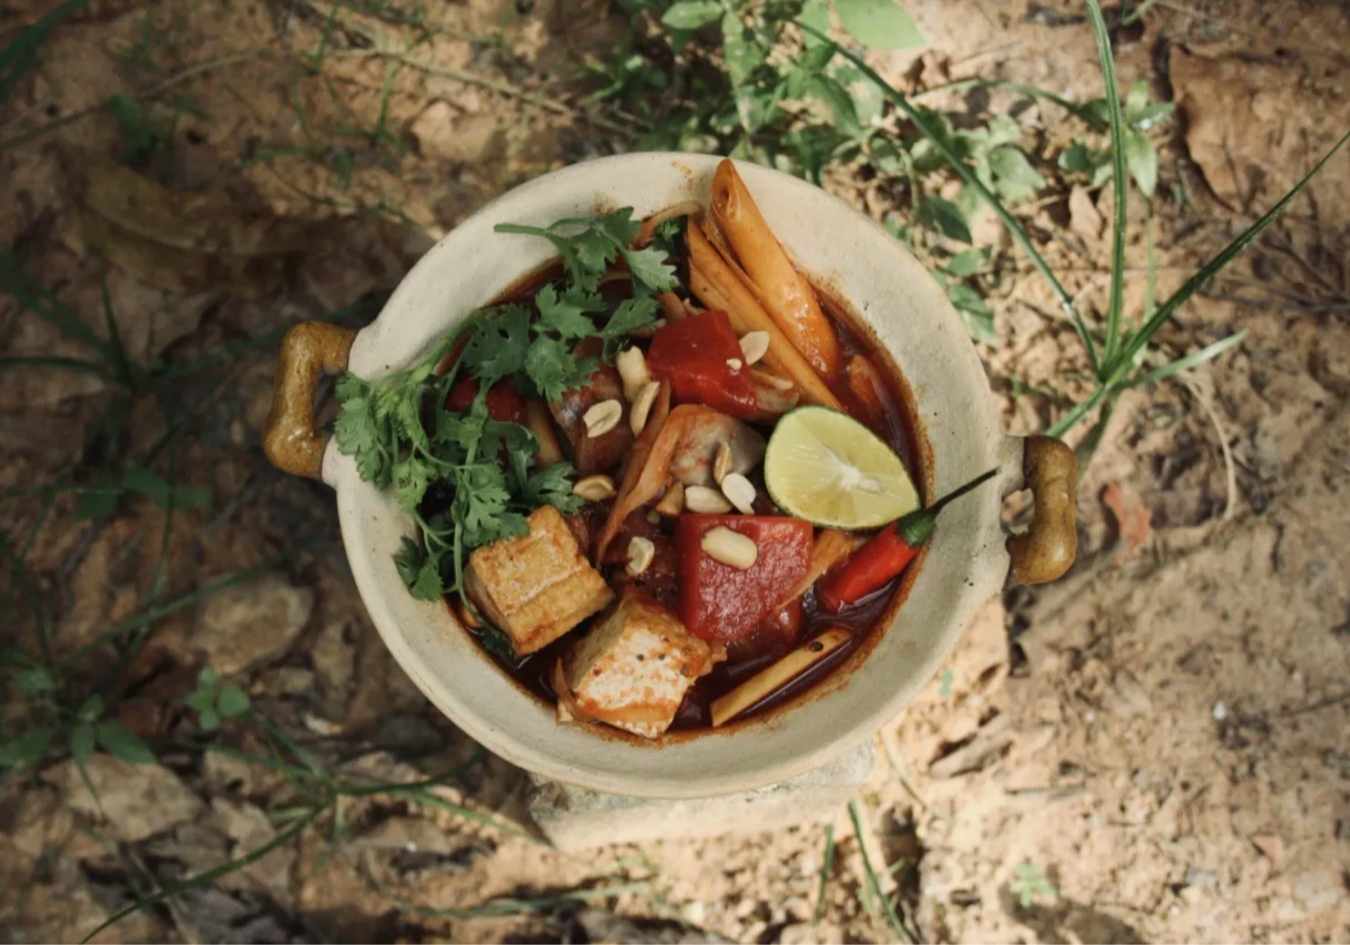 A bowl of vegan food with tofu and watermelon inside a claypot dish on the ground made for Edible Ethics vegan food blog